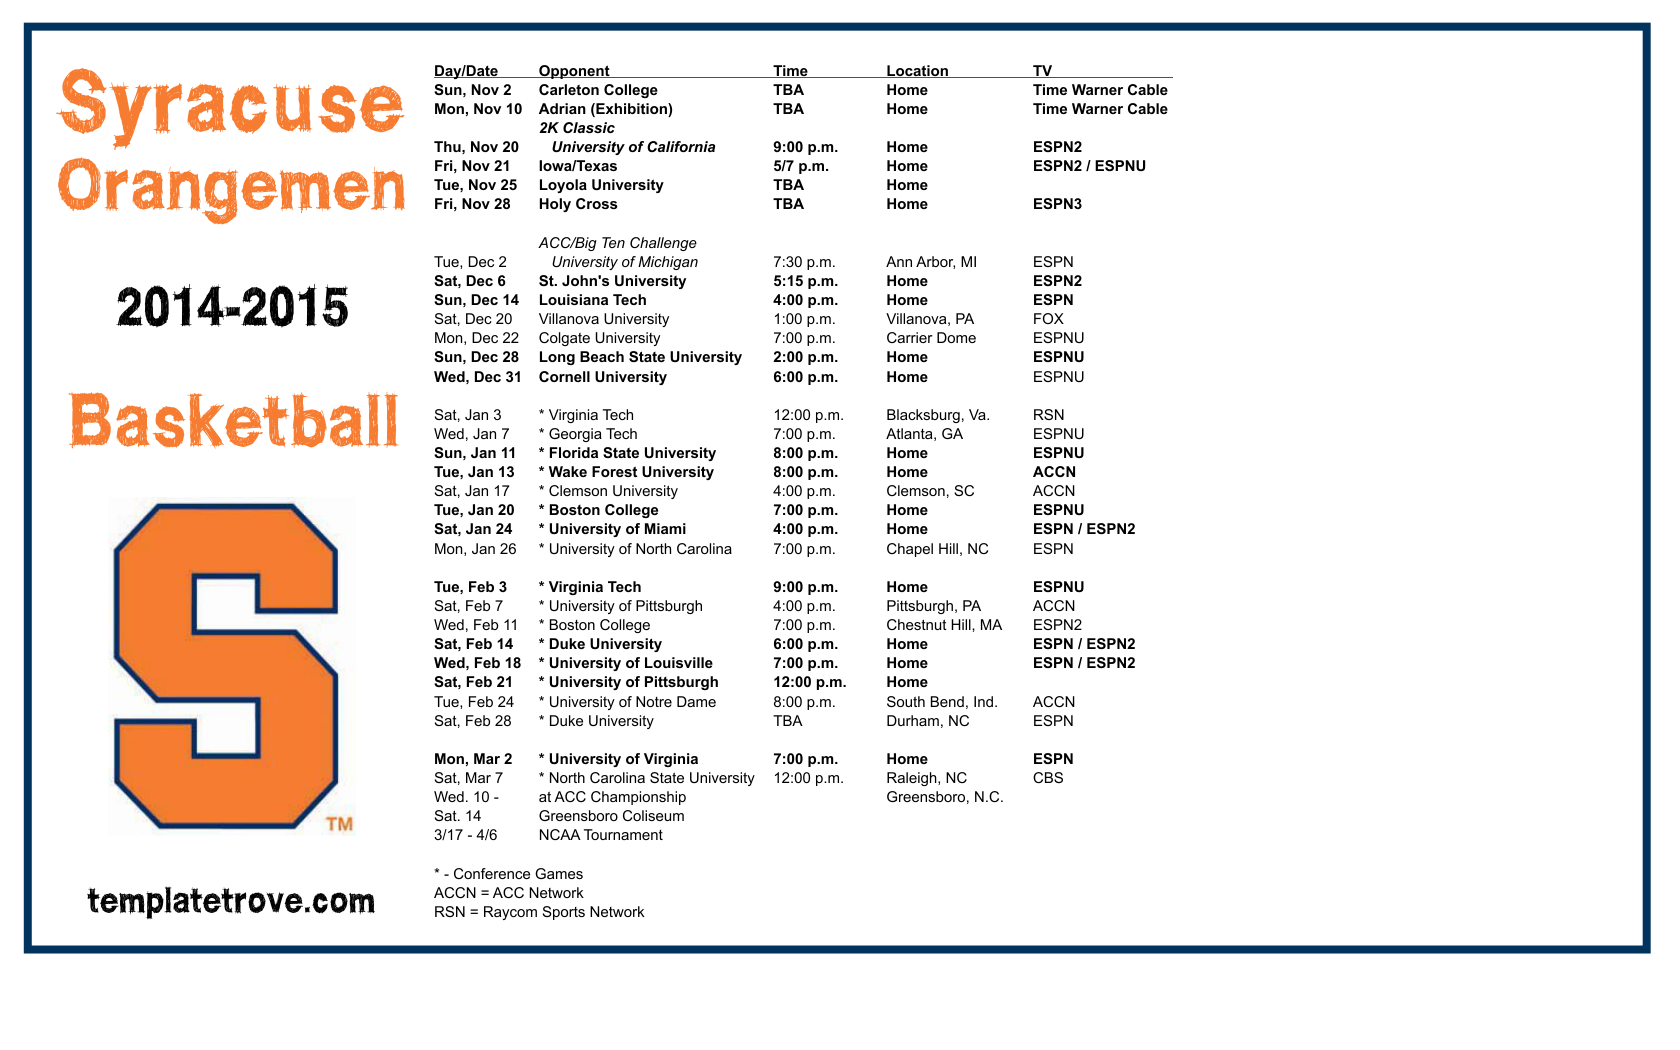 Where can you find a Syracuse basketball schedule? paperwingrvice.web